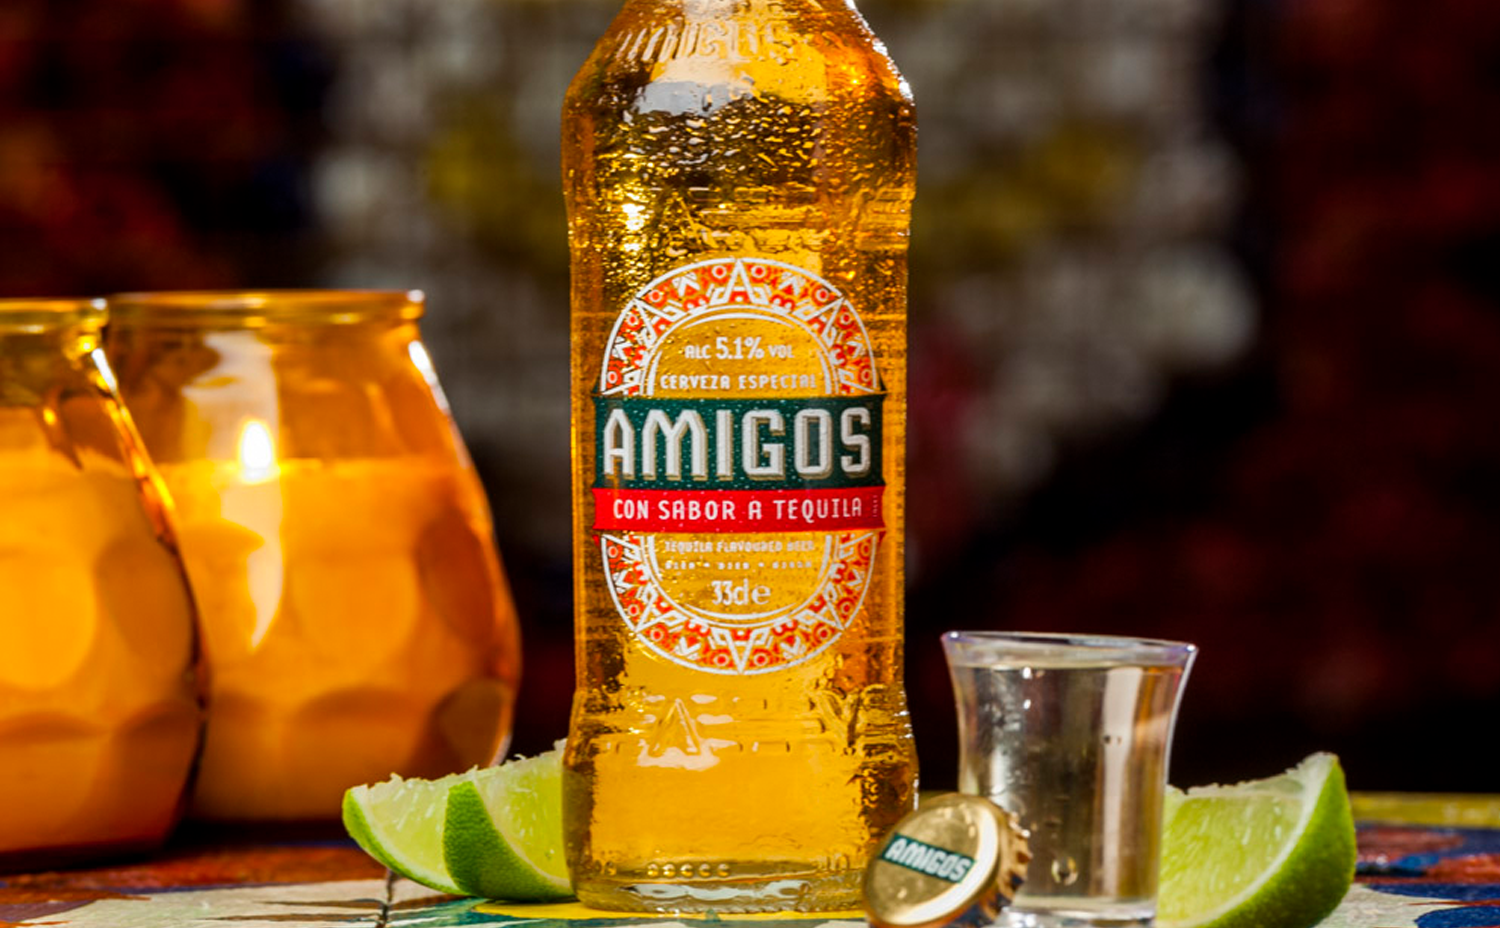 We’ve launched the new Amigos!